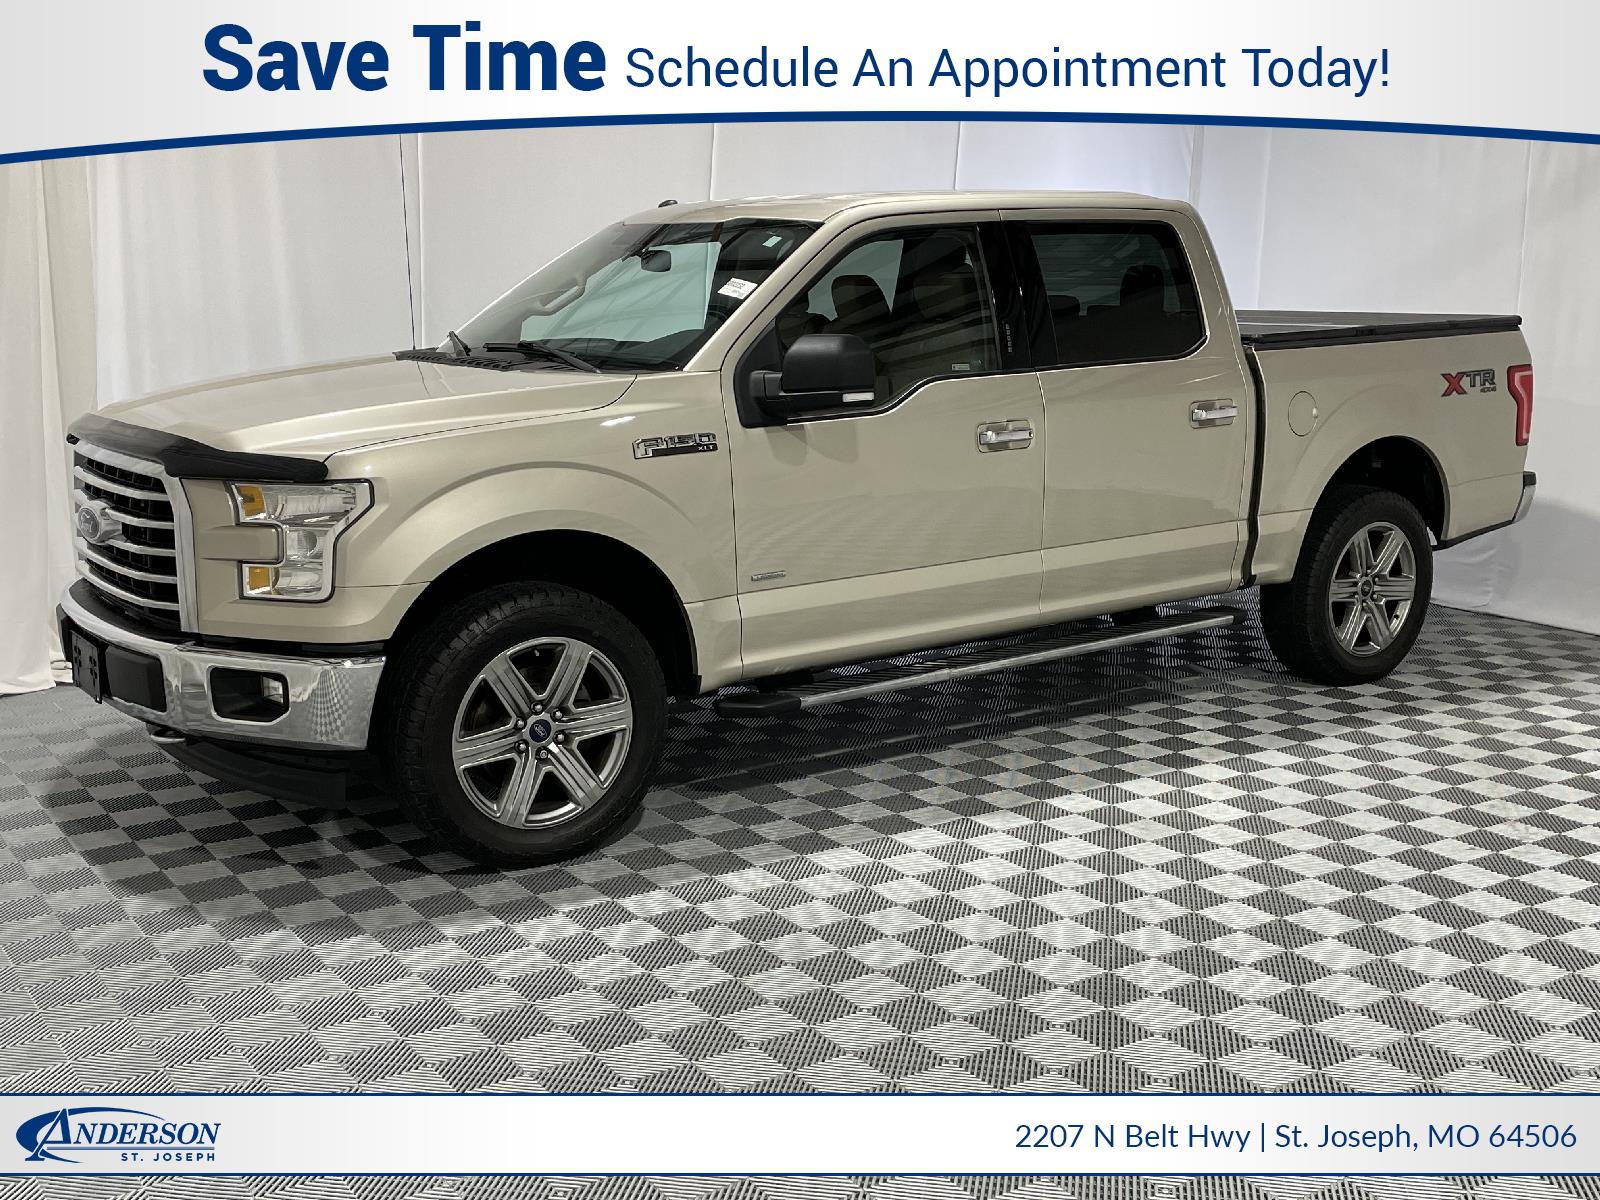 Used 2017 Ford F-150 XLT Stock: 3002232